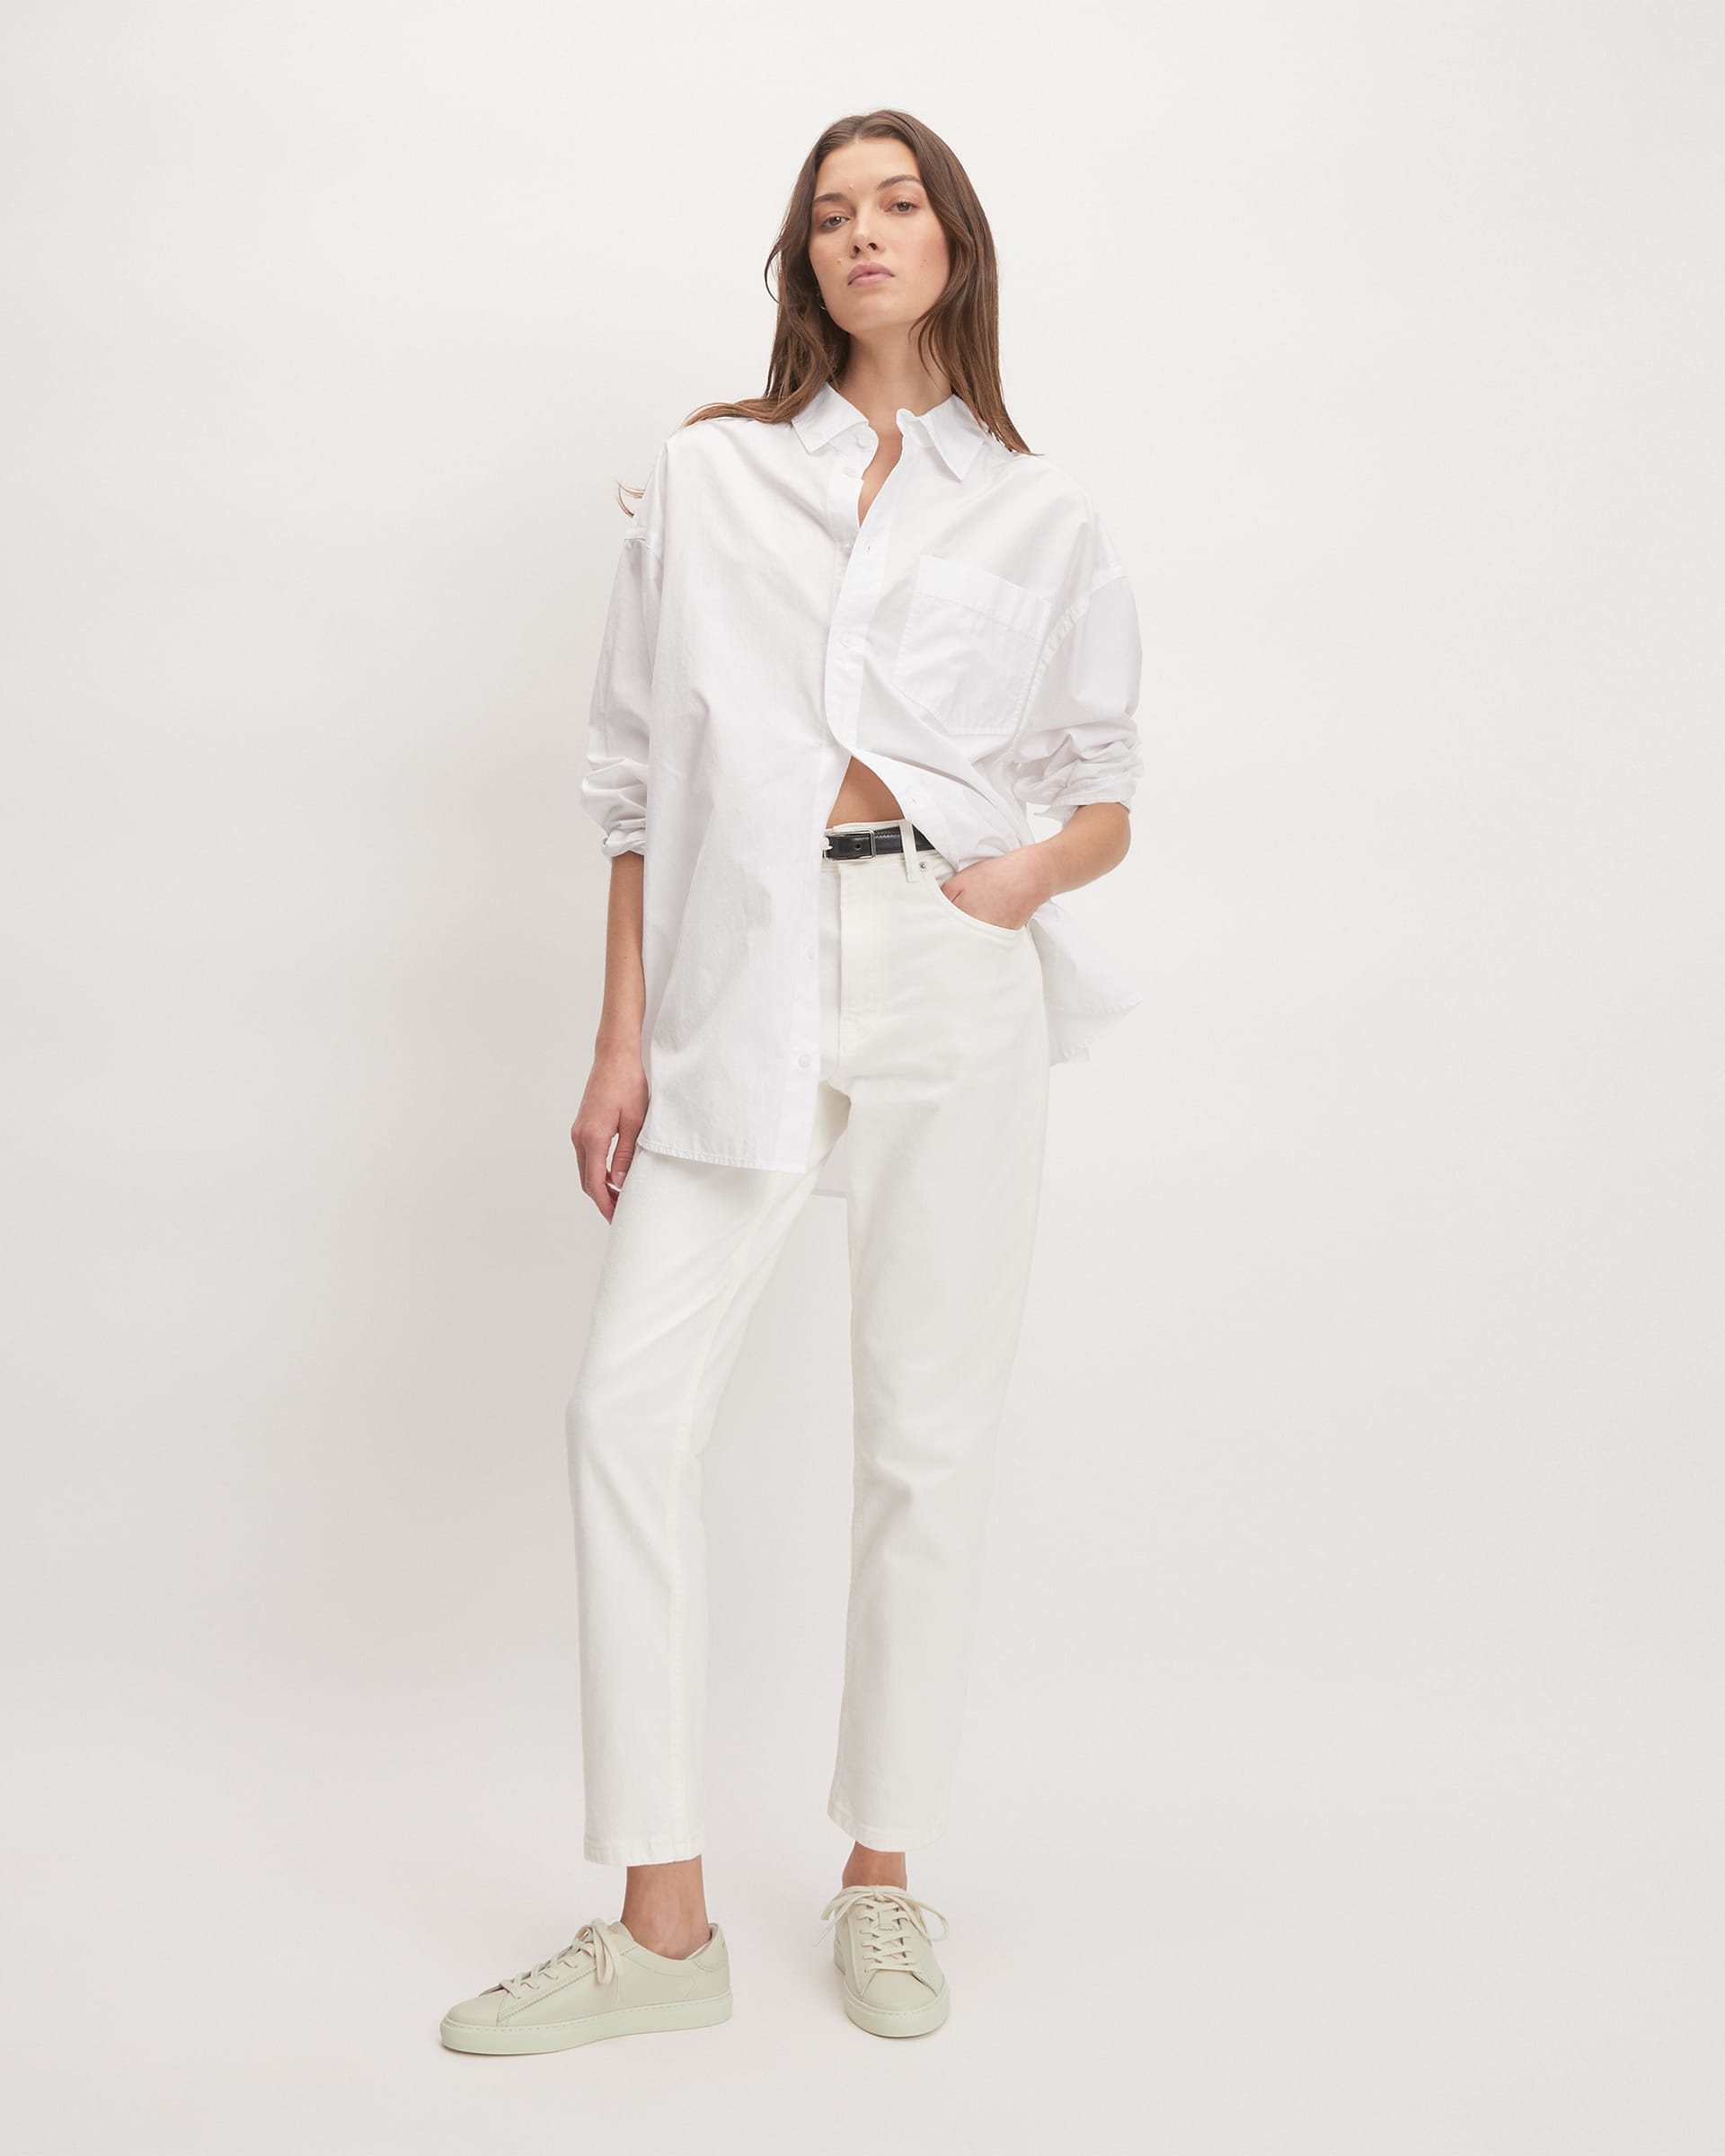 The Day Sneaker Parchment – Everlane